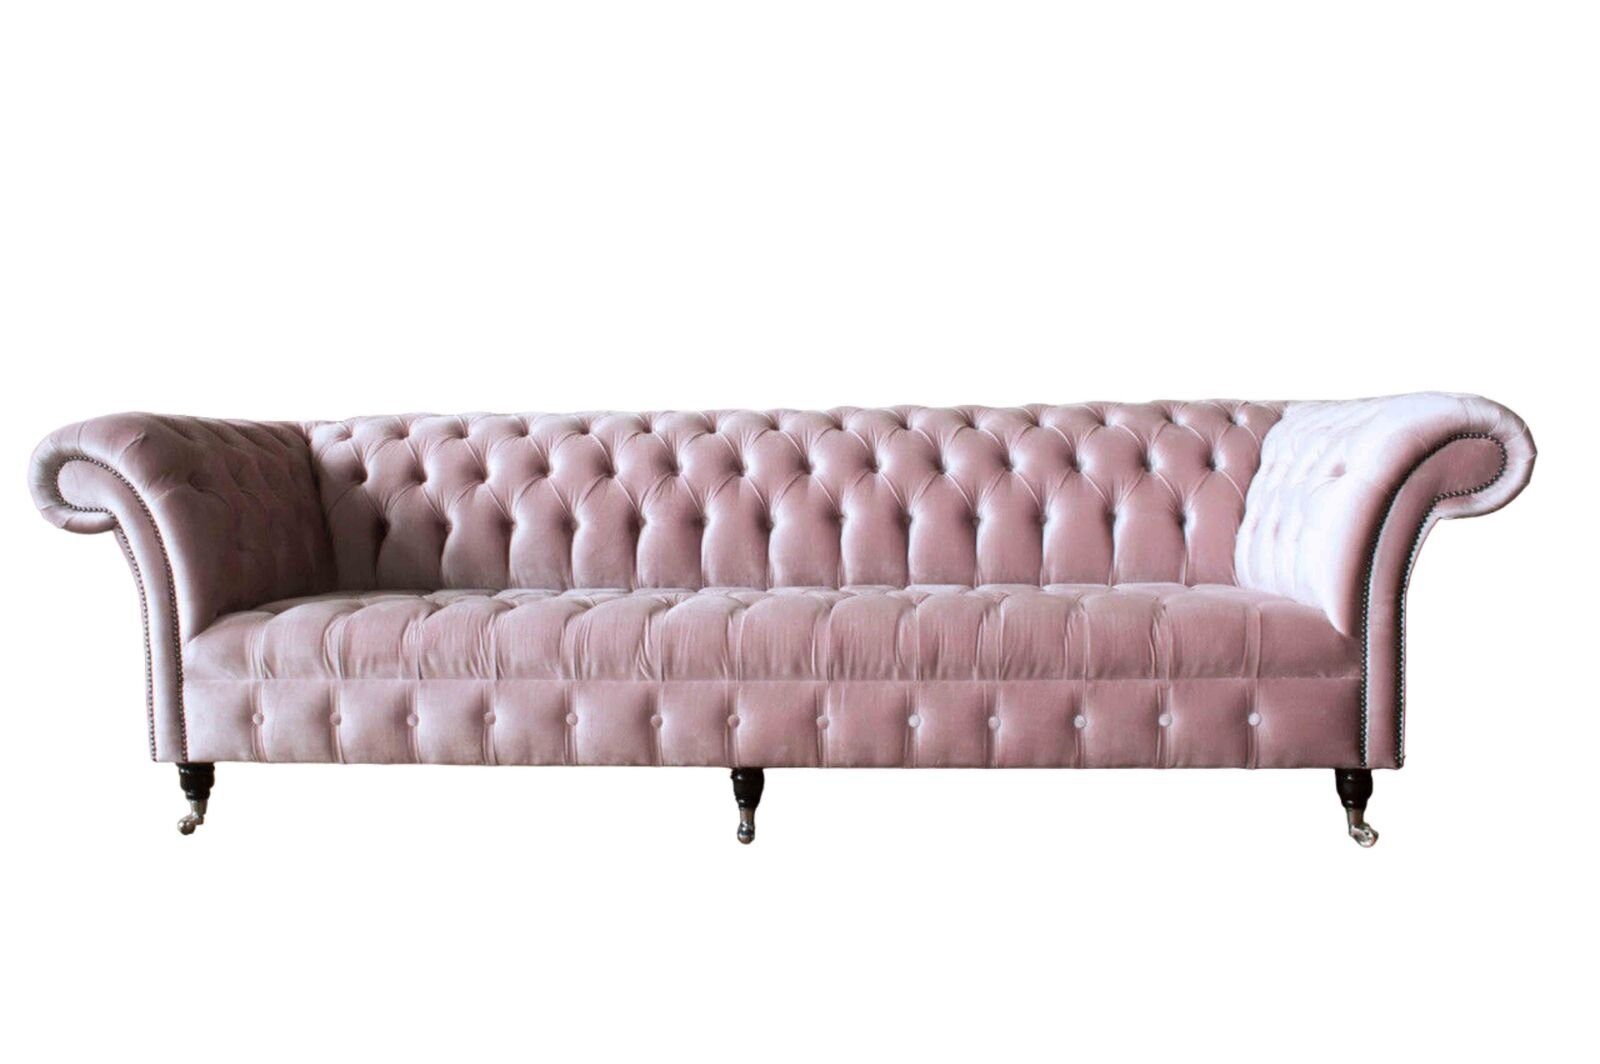 JVmoebel Sofa Chesterfield Rosa Couch Sofa Polster 4 Sitzer Couchen Sitz Sofas Neu, Made In Europe